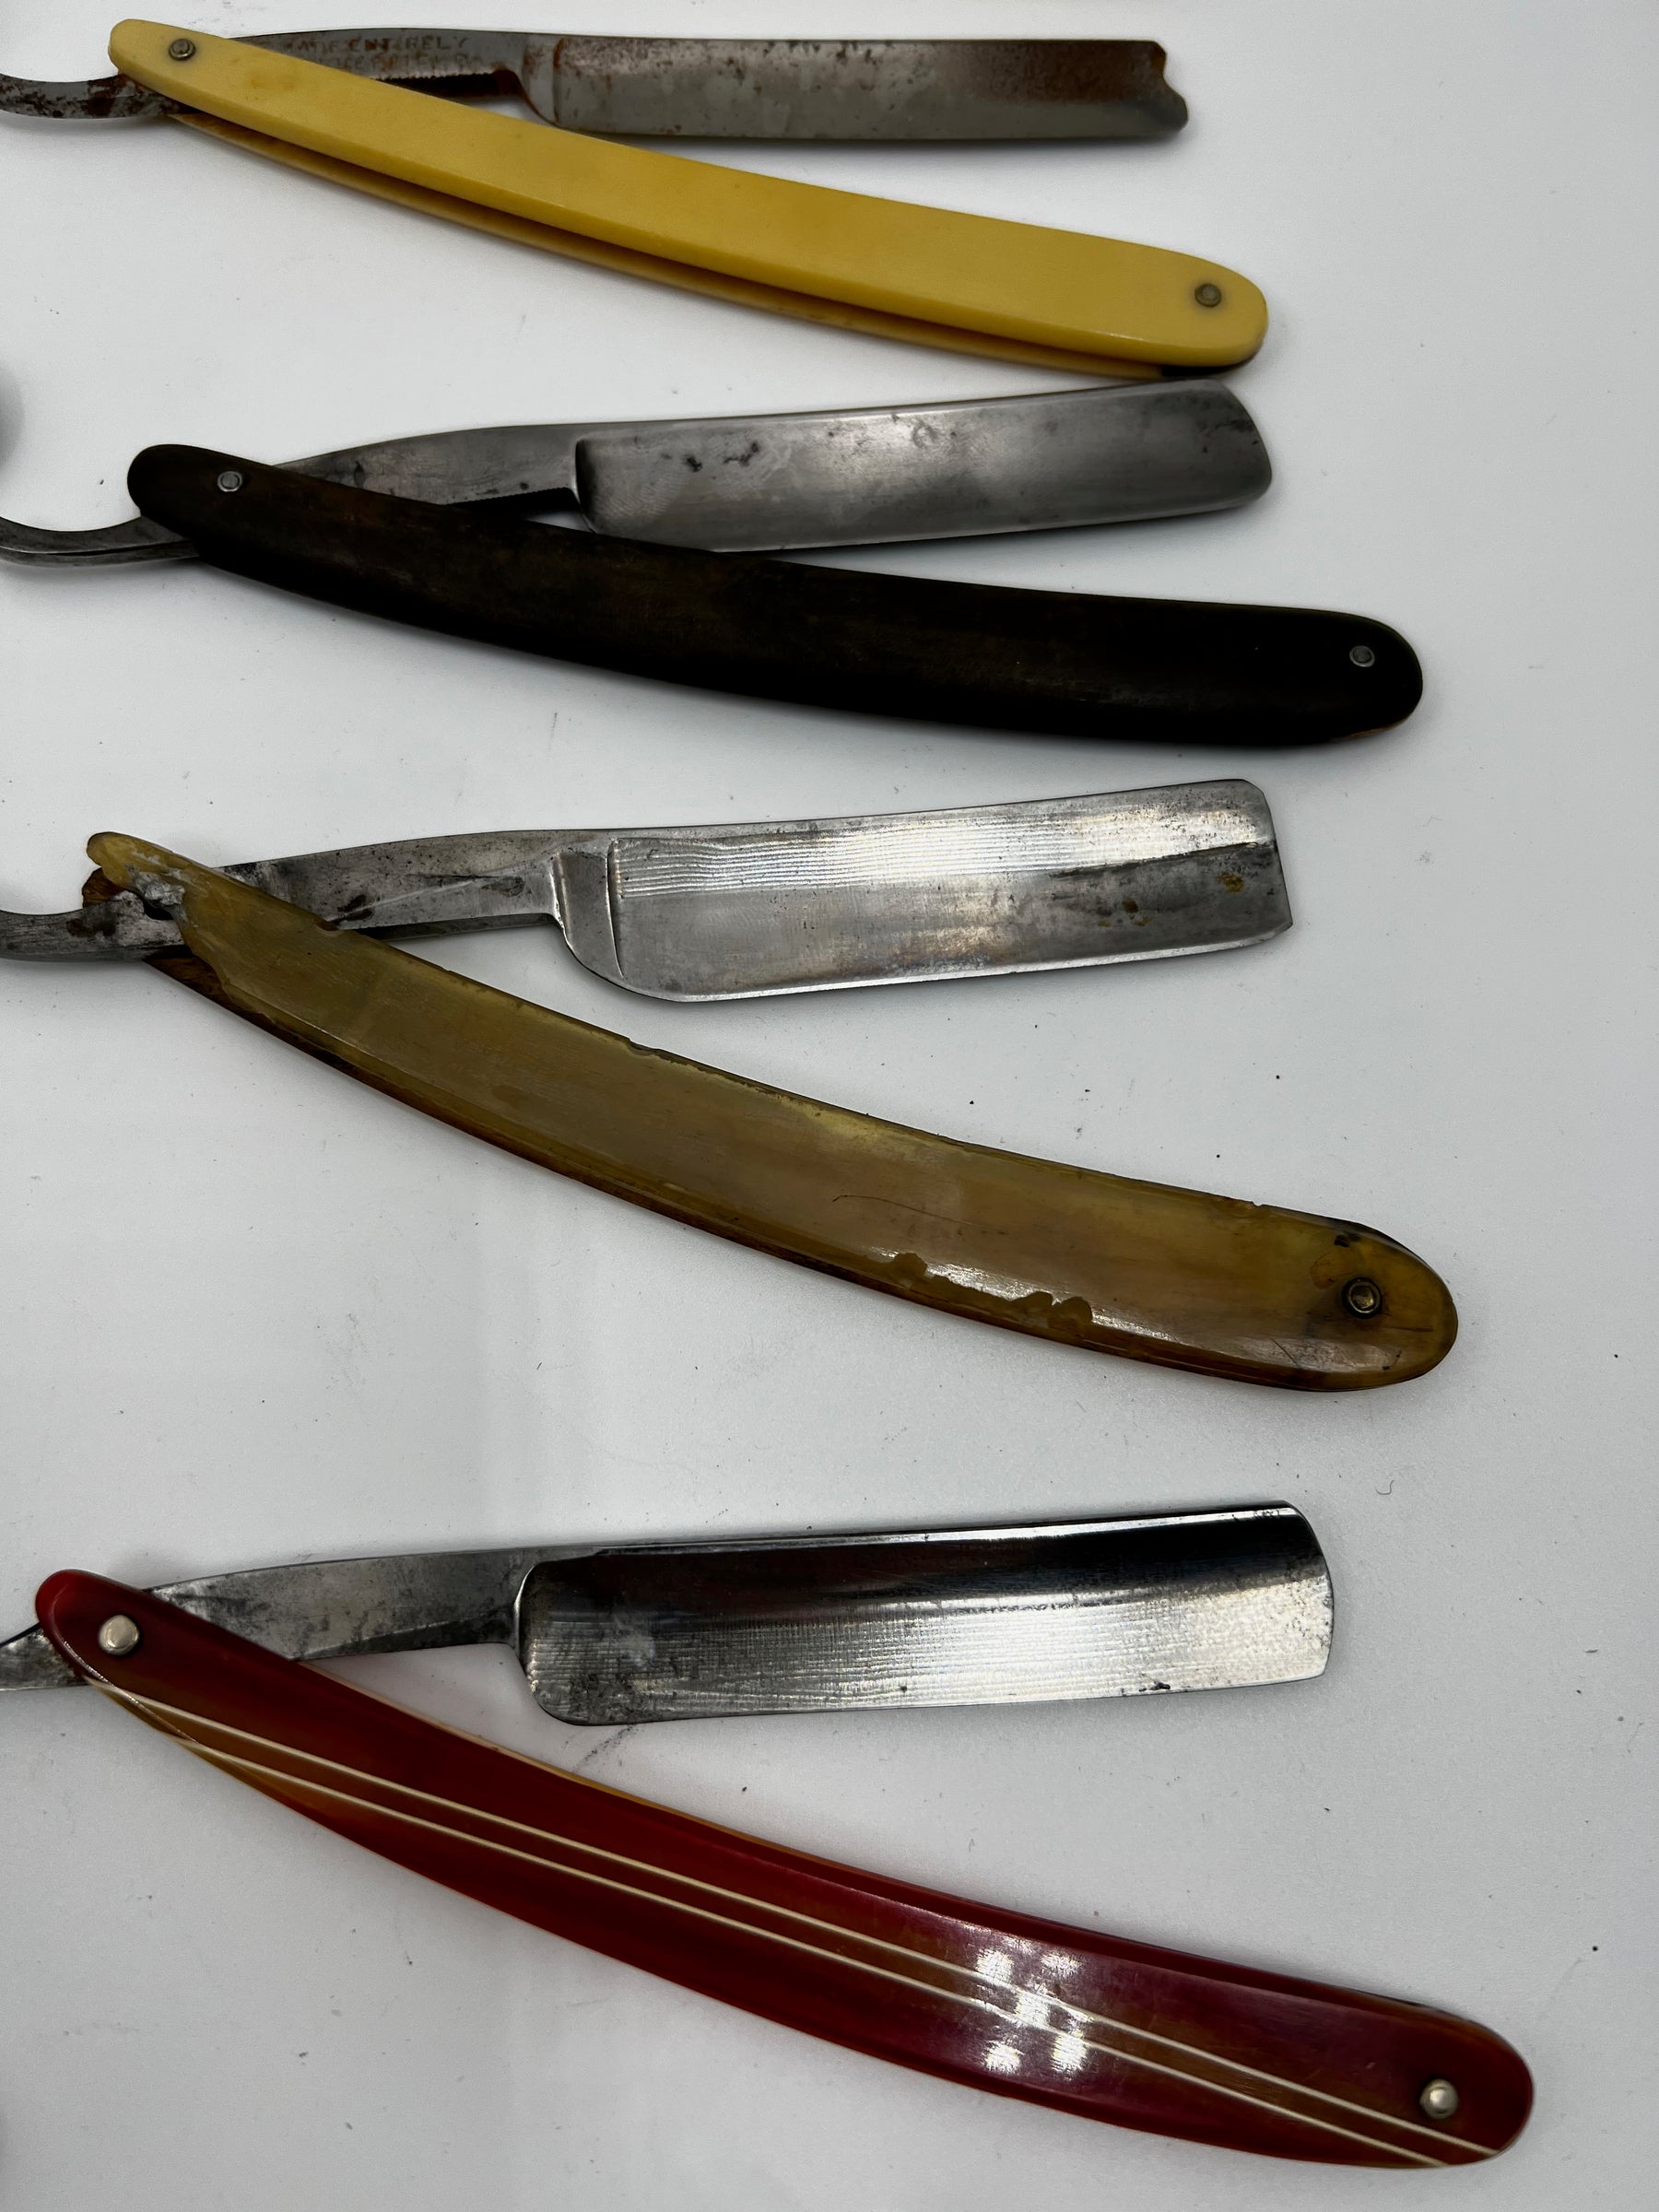 Vintage 10 Straight Razor Lot #29 - May Contain Sheffield, Solingen, Japanese & USA makers, as pictured